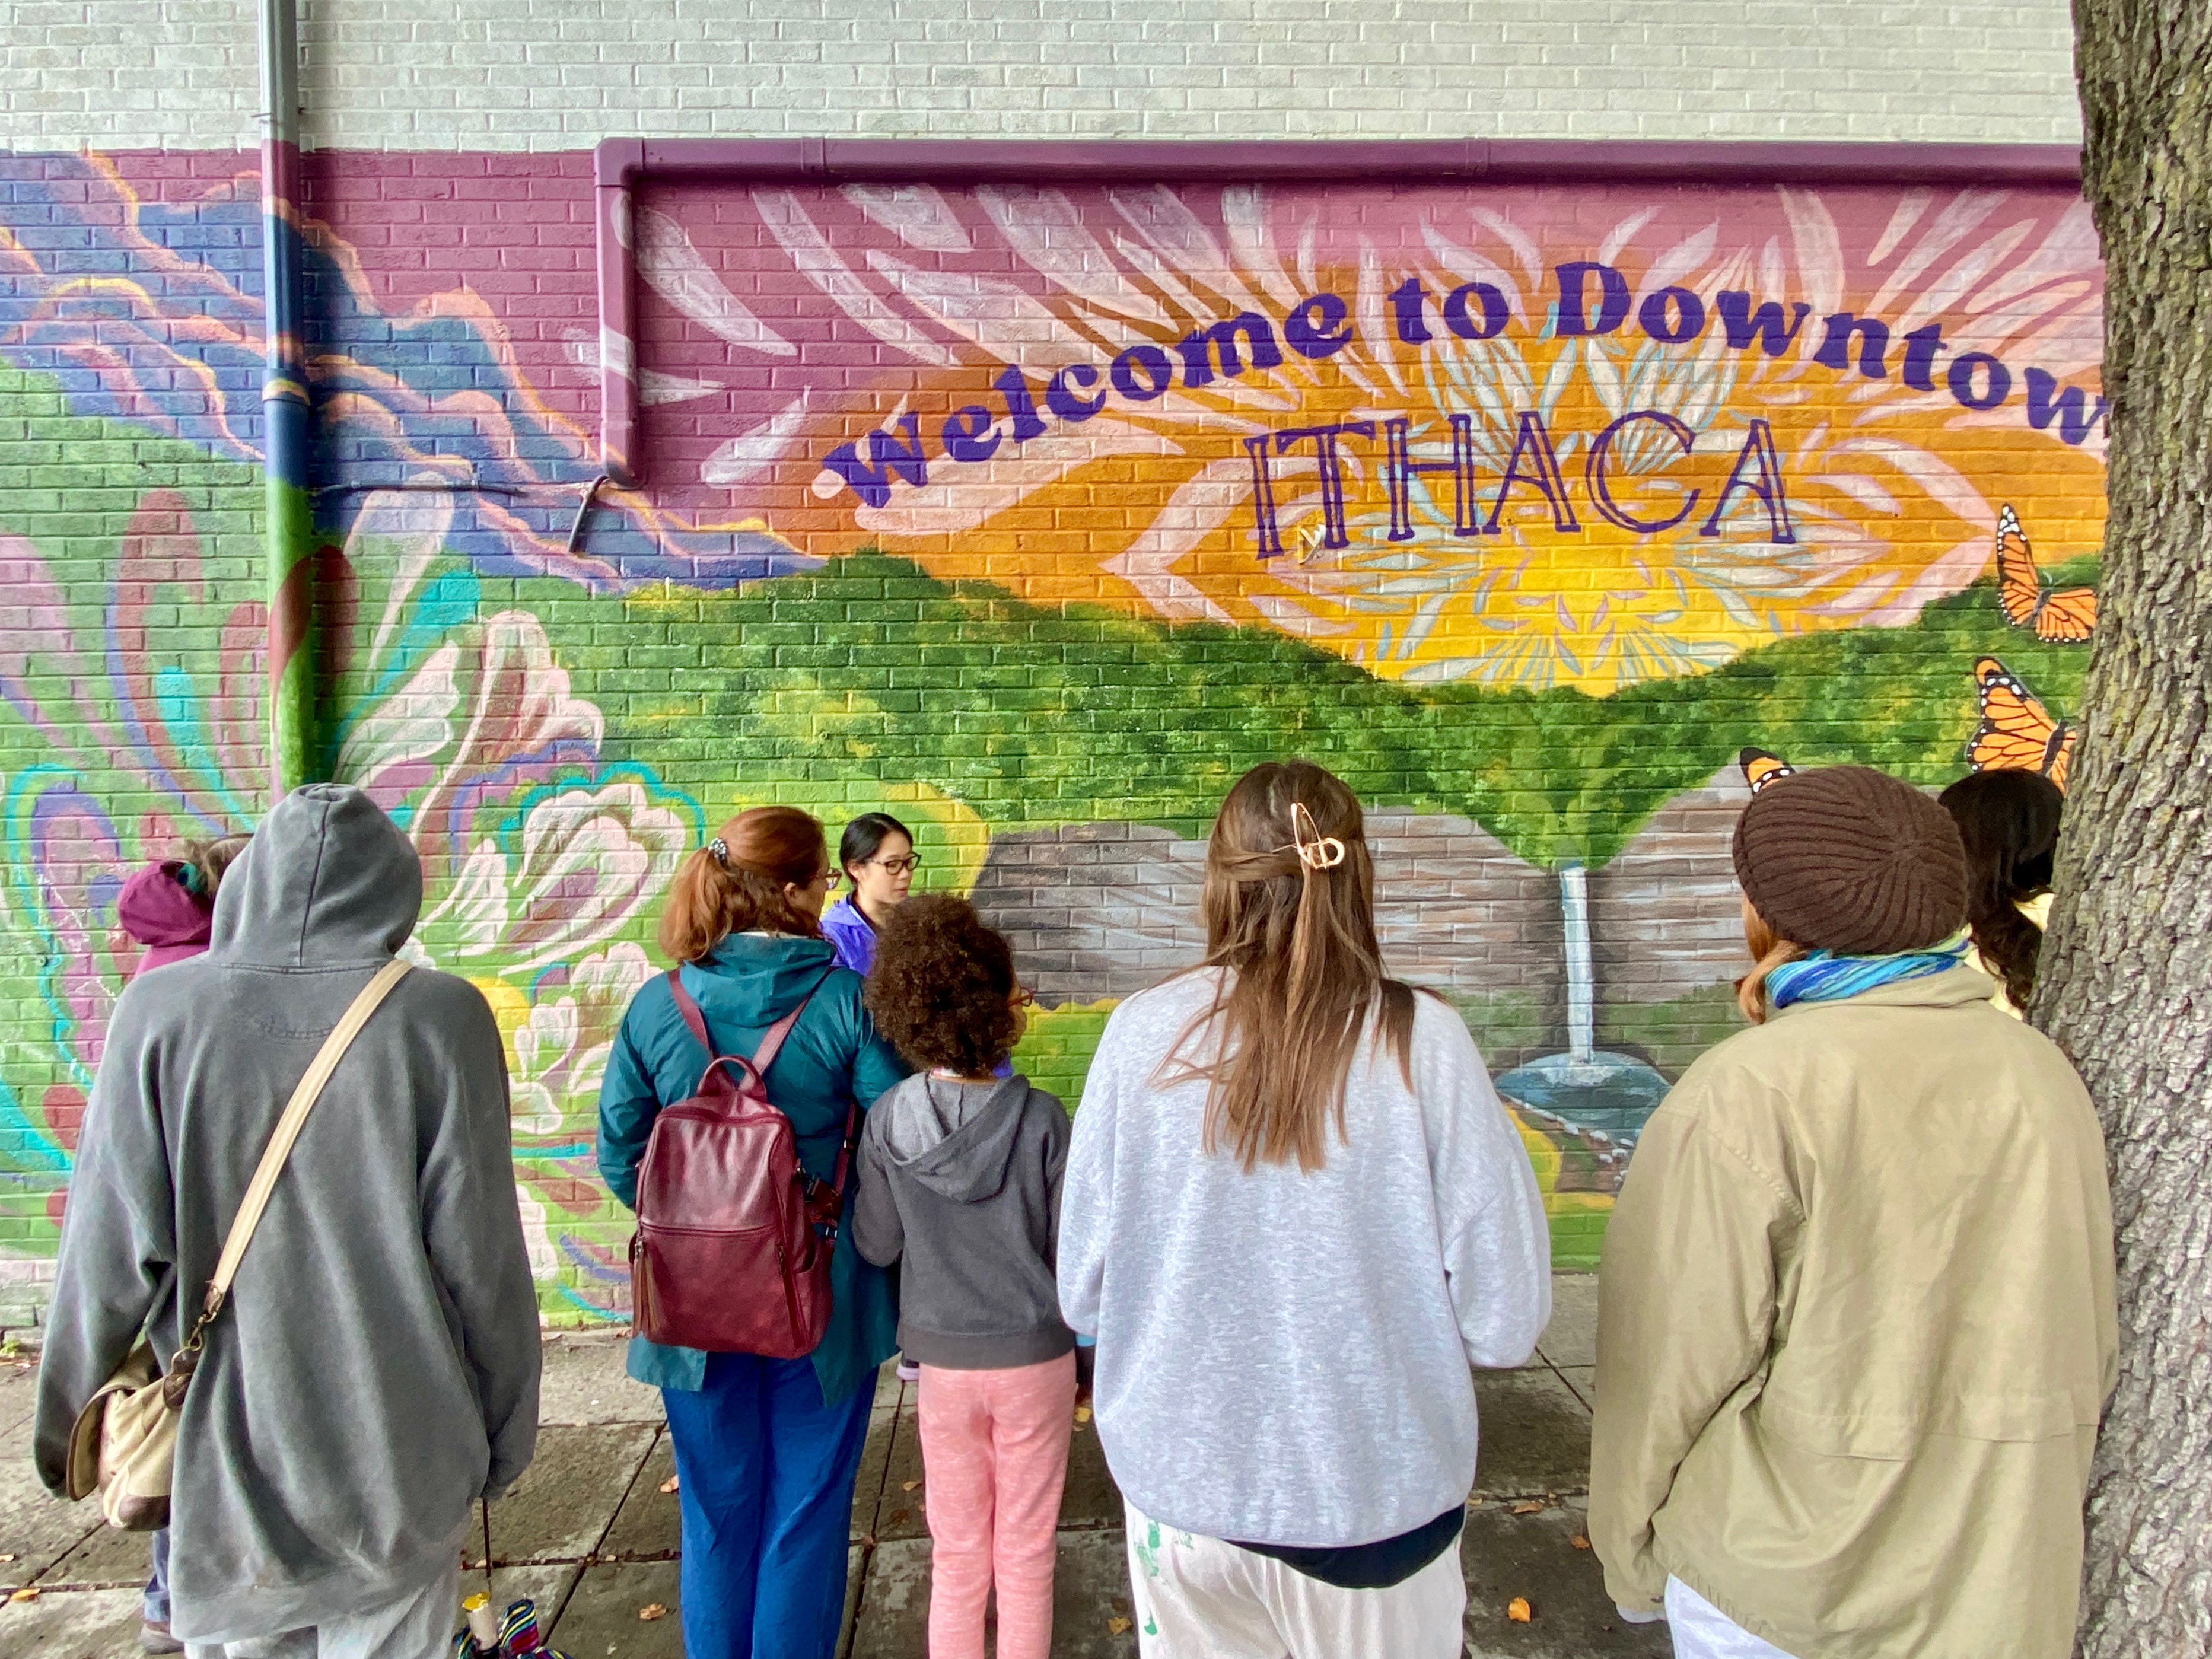 Seven mural tour attendees stand facing a mural with their backs to the camera. The mural is called 'Welcome to Downtown Ithaca' and was painted by Kaitlyn Cronin. The mural shows a large, vibrant sunset over Taughannock Falls (a tall, thin waterfall) with abstract flowers on the left and larger-than-life monarch butterflies flying upwards on the right. The mural says 'Welcome to Downtown' in an arc and 'Ithaca' below it. Lucy stands in front of the mural, reading a description.